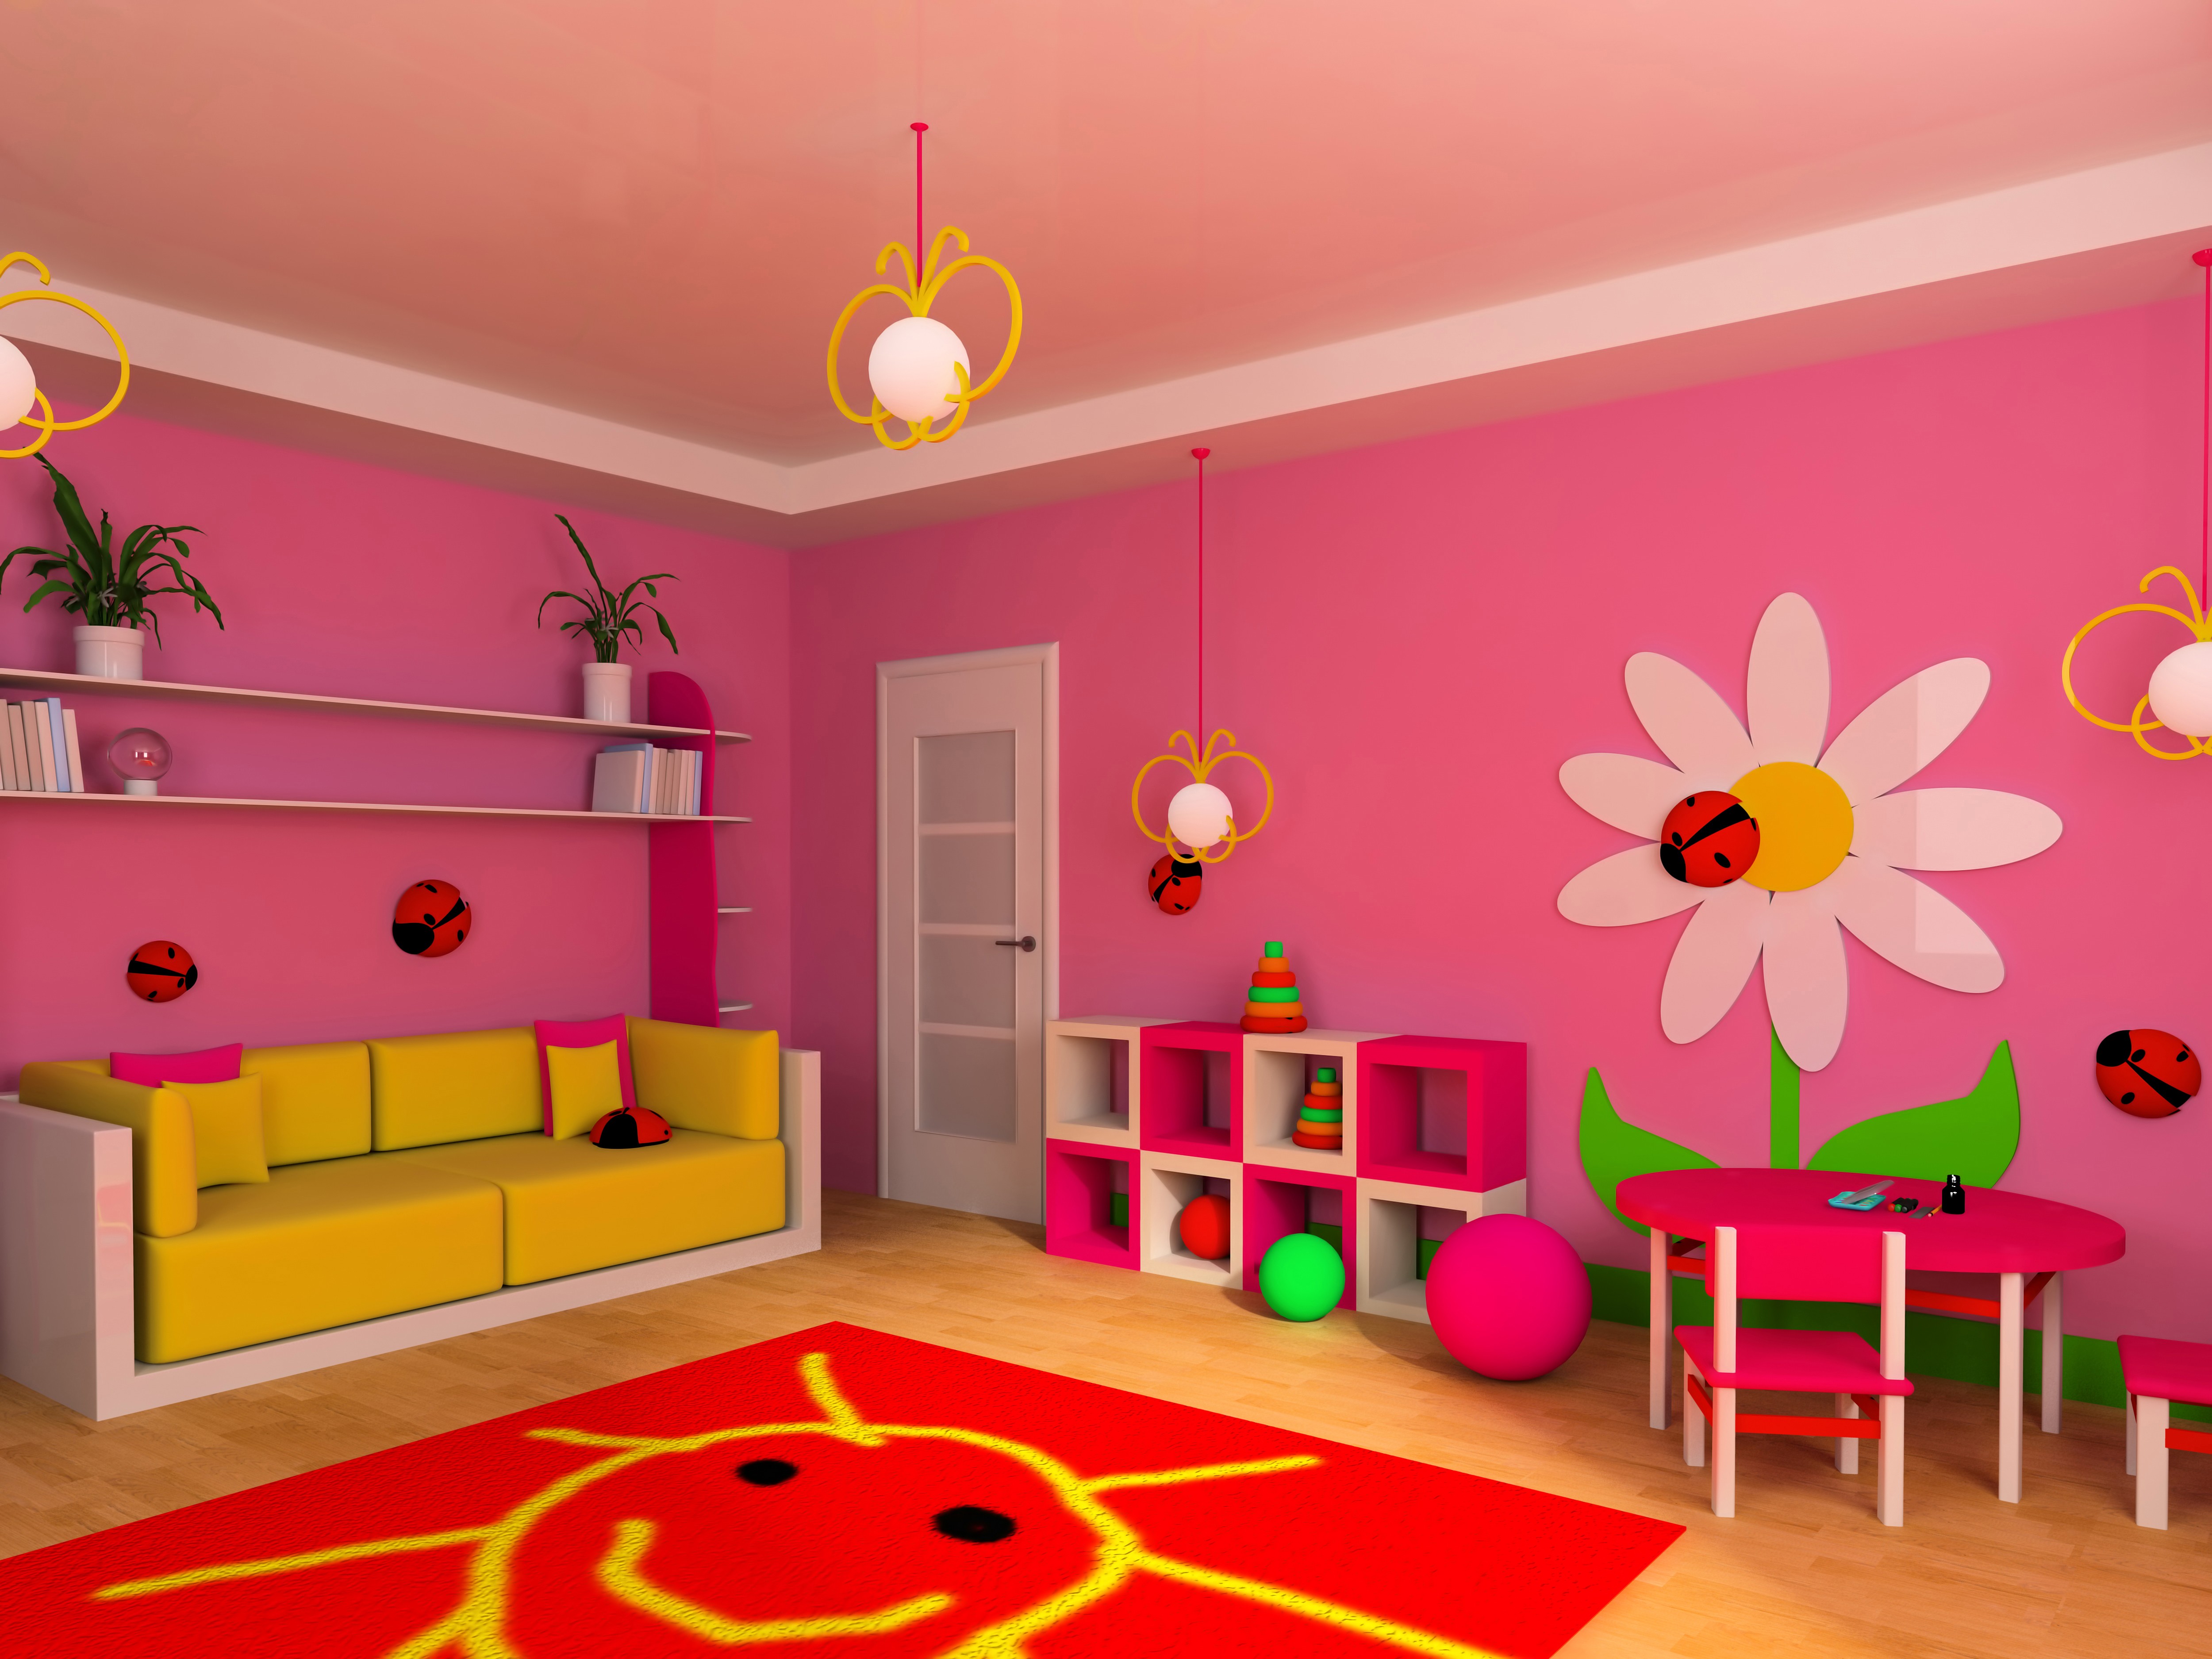 General 5000x3750 colorful pink indoors room interior